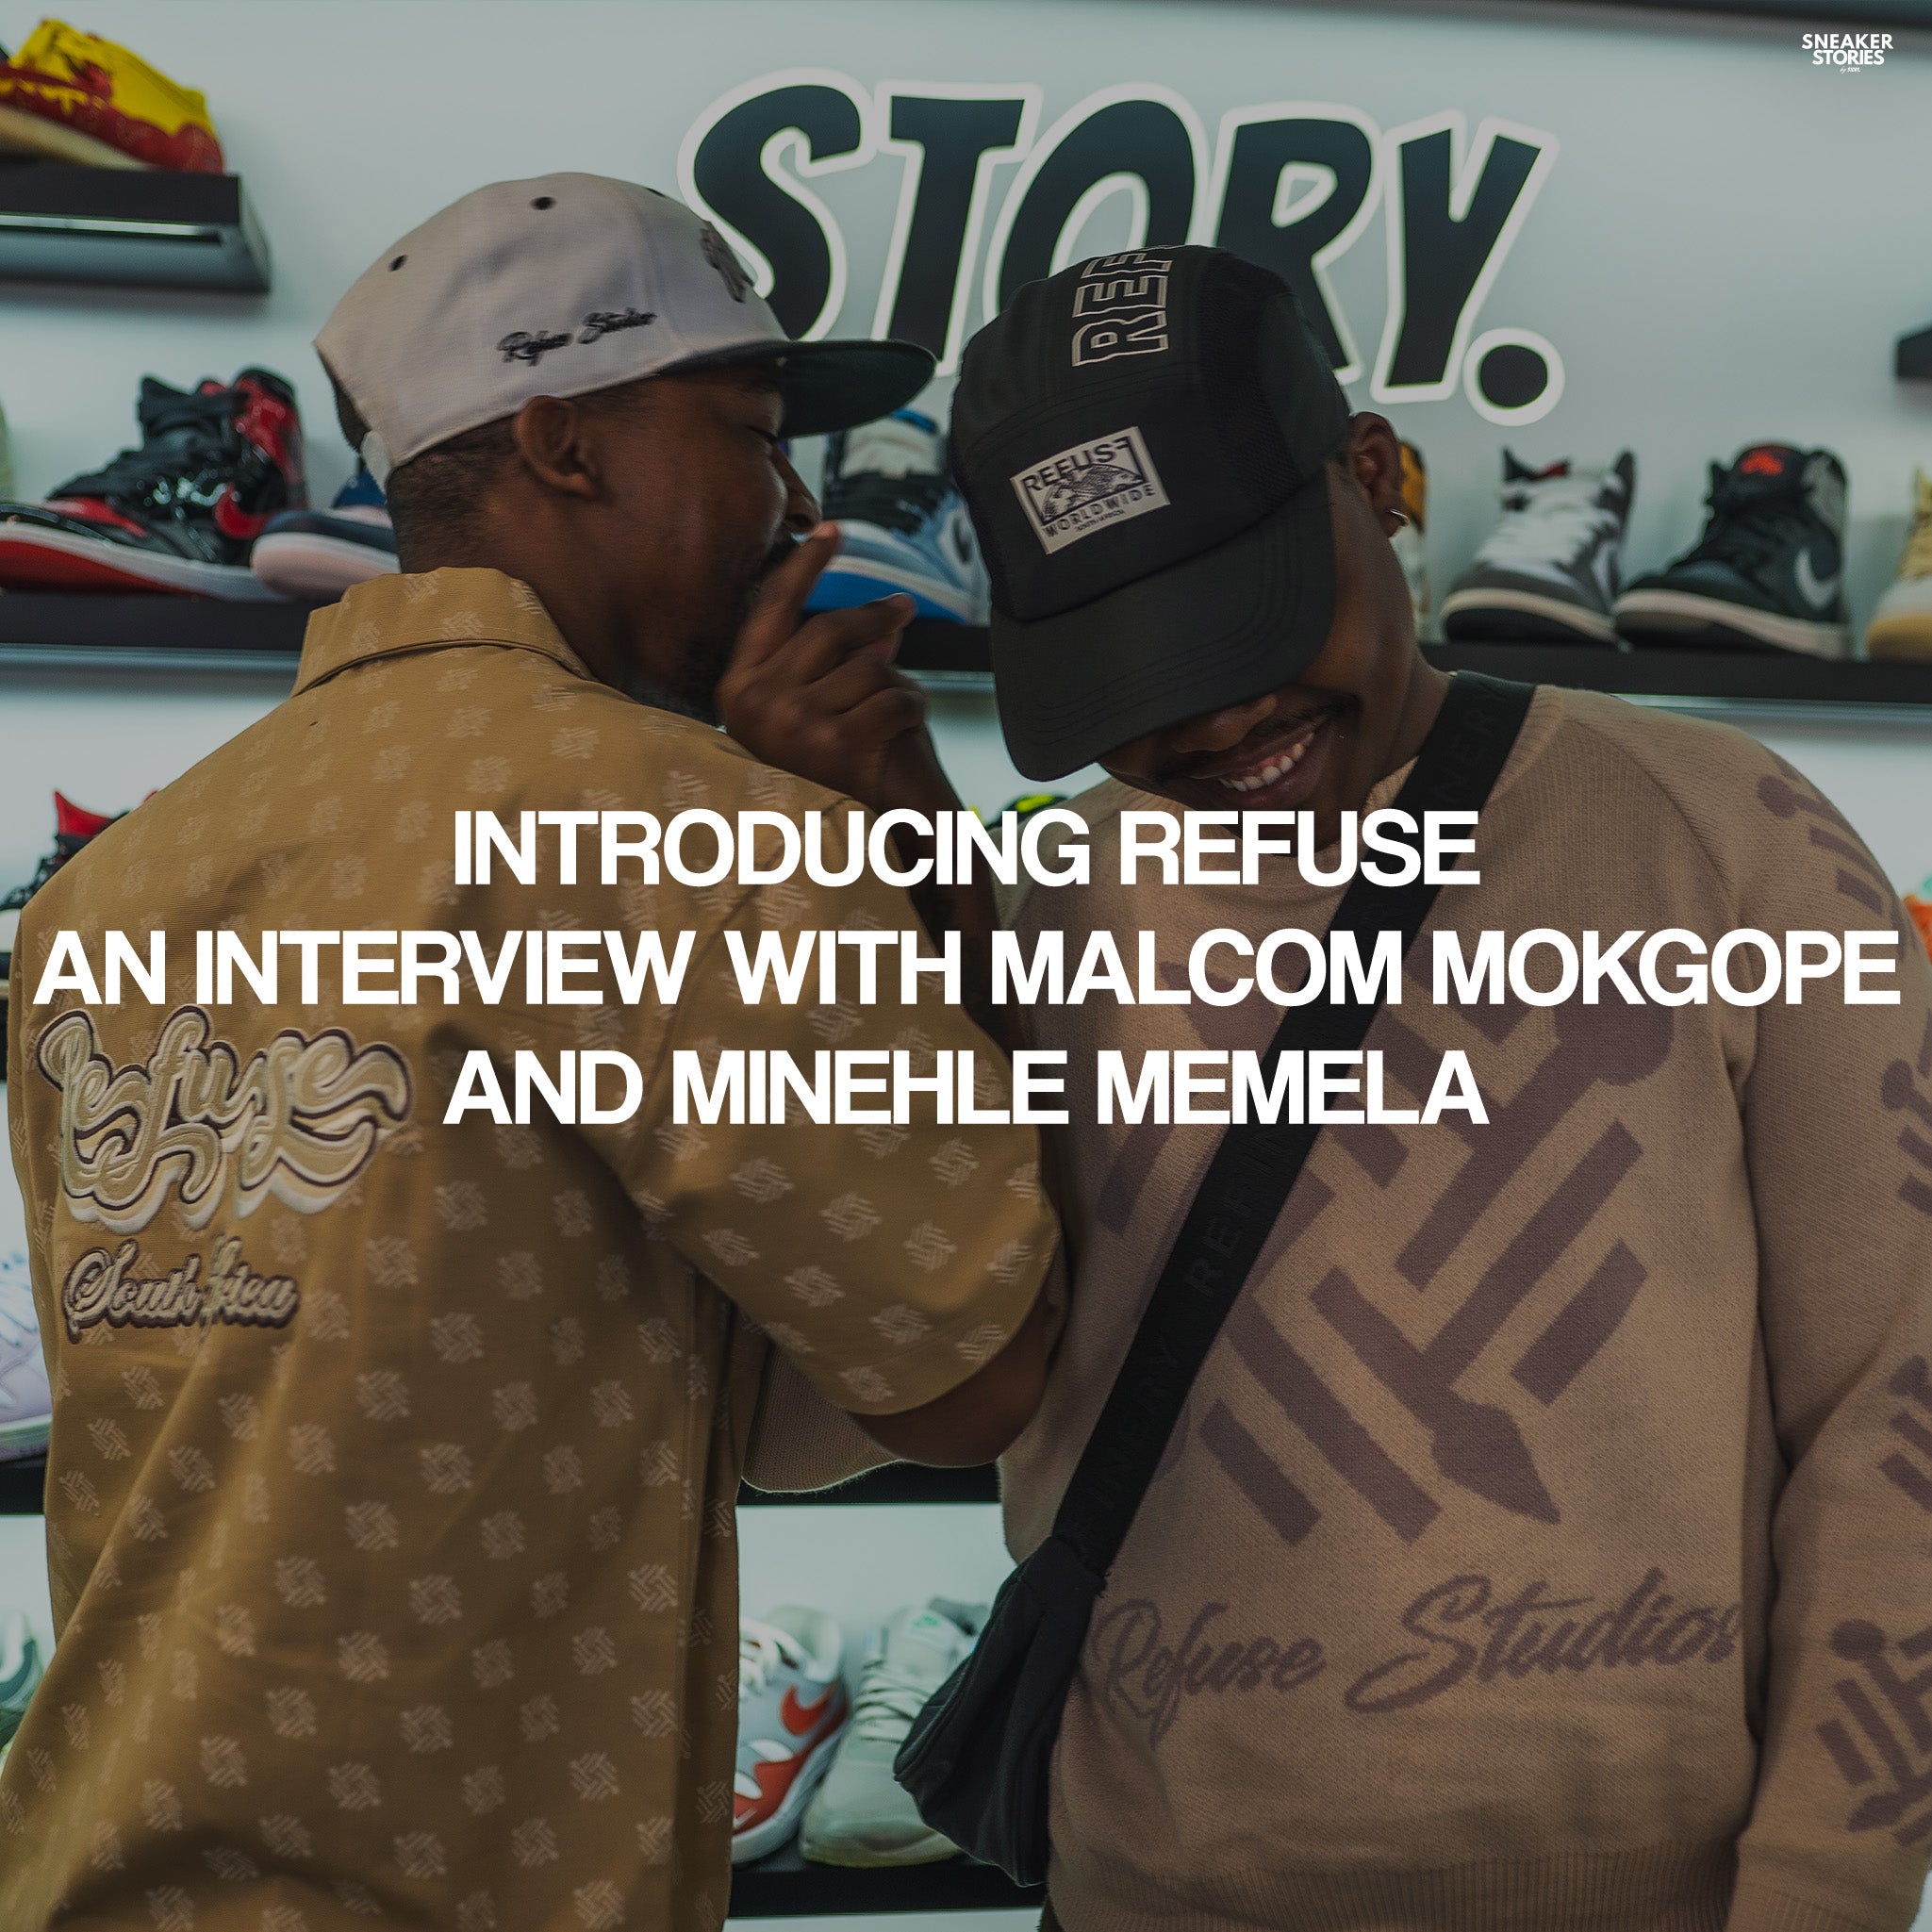 Introducing REFUSE  An interview with Malcom Mokgope and Minehle Memela